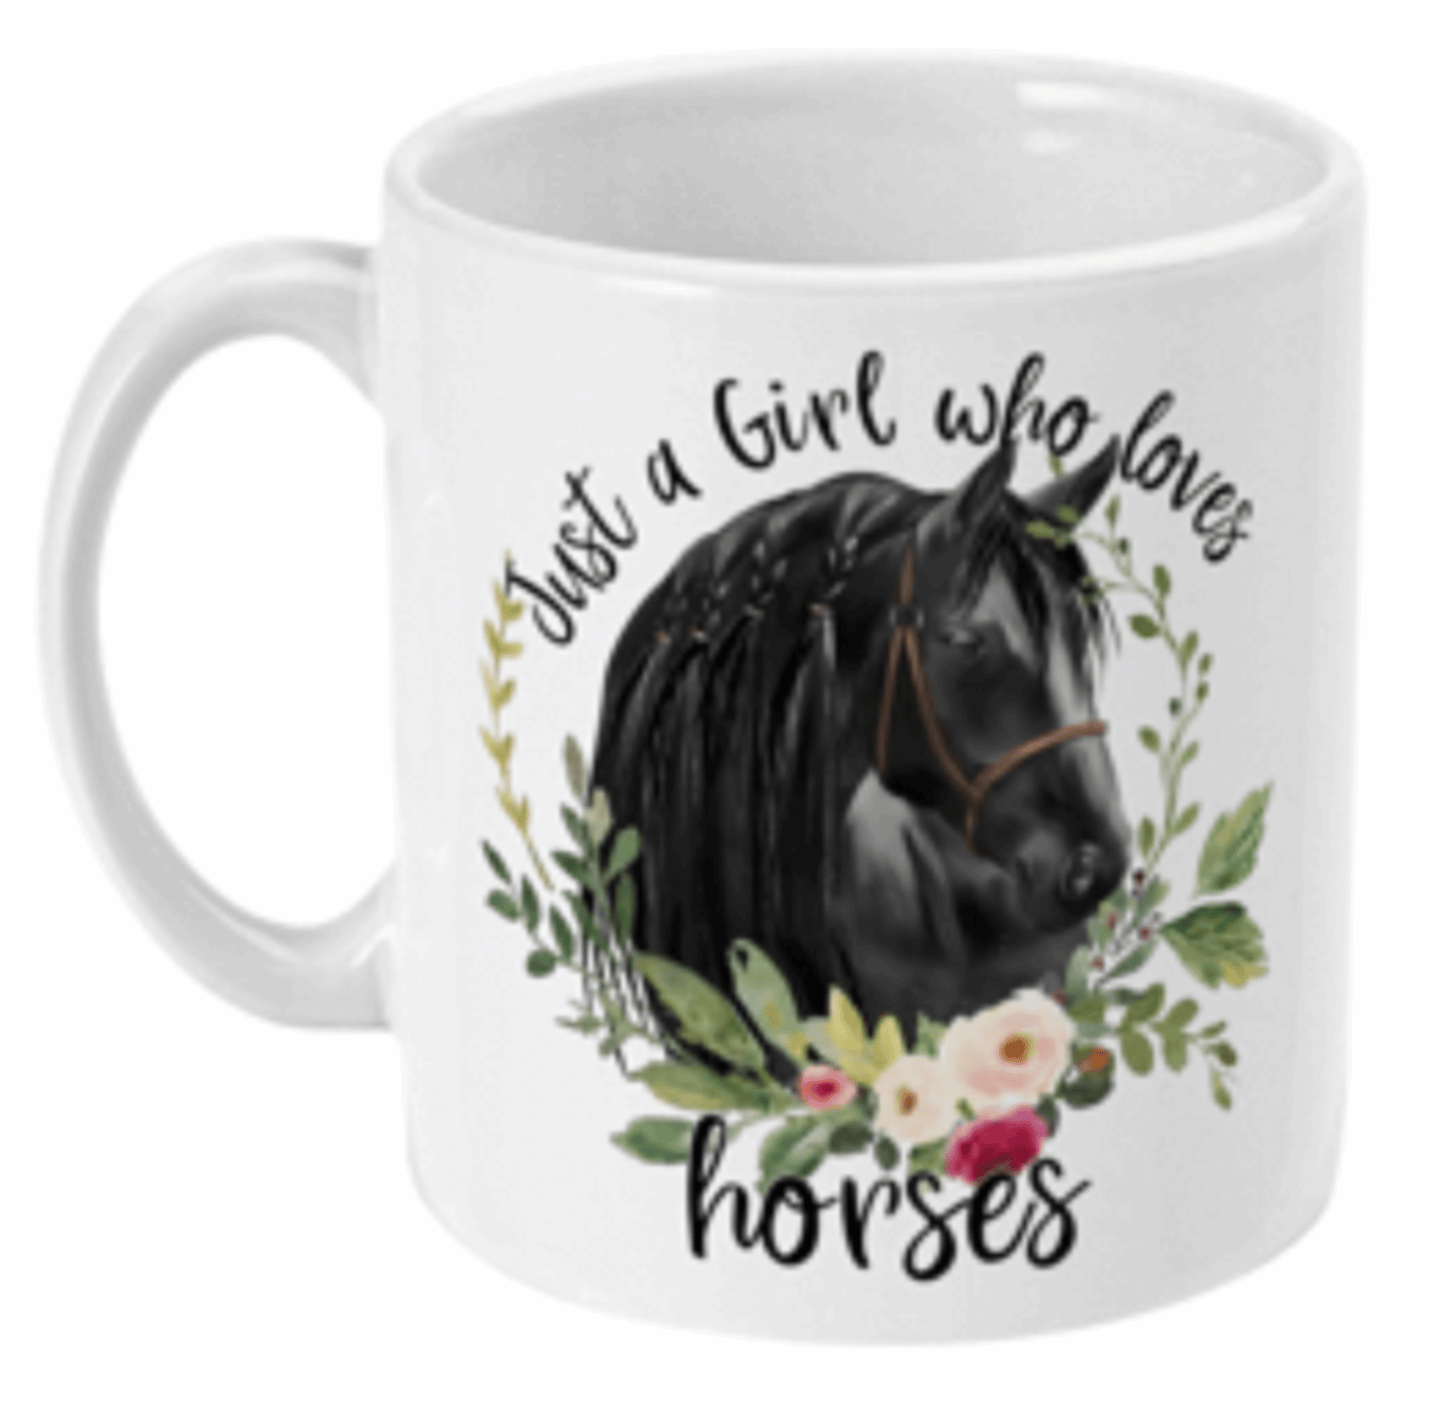  Just A Girl Who Loves Horses Coffee Mug by Free Spirit Accessories sold by Free Spirit Accessories